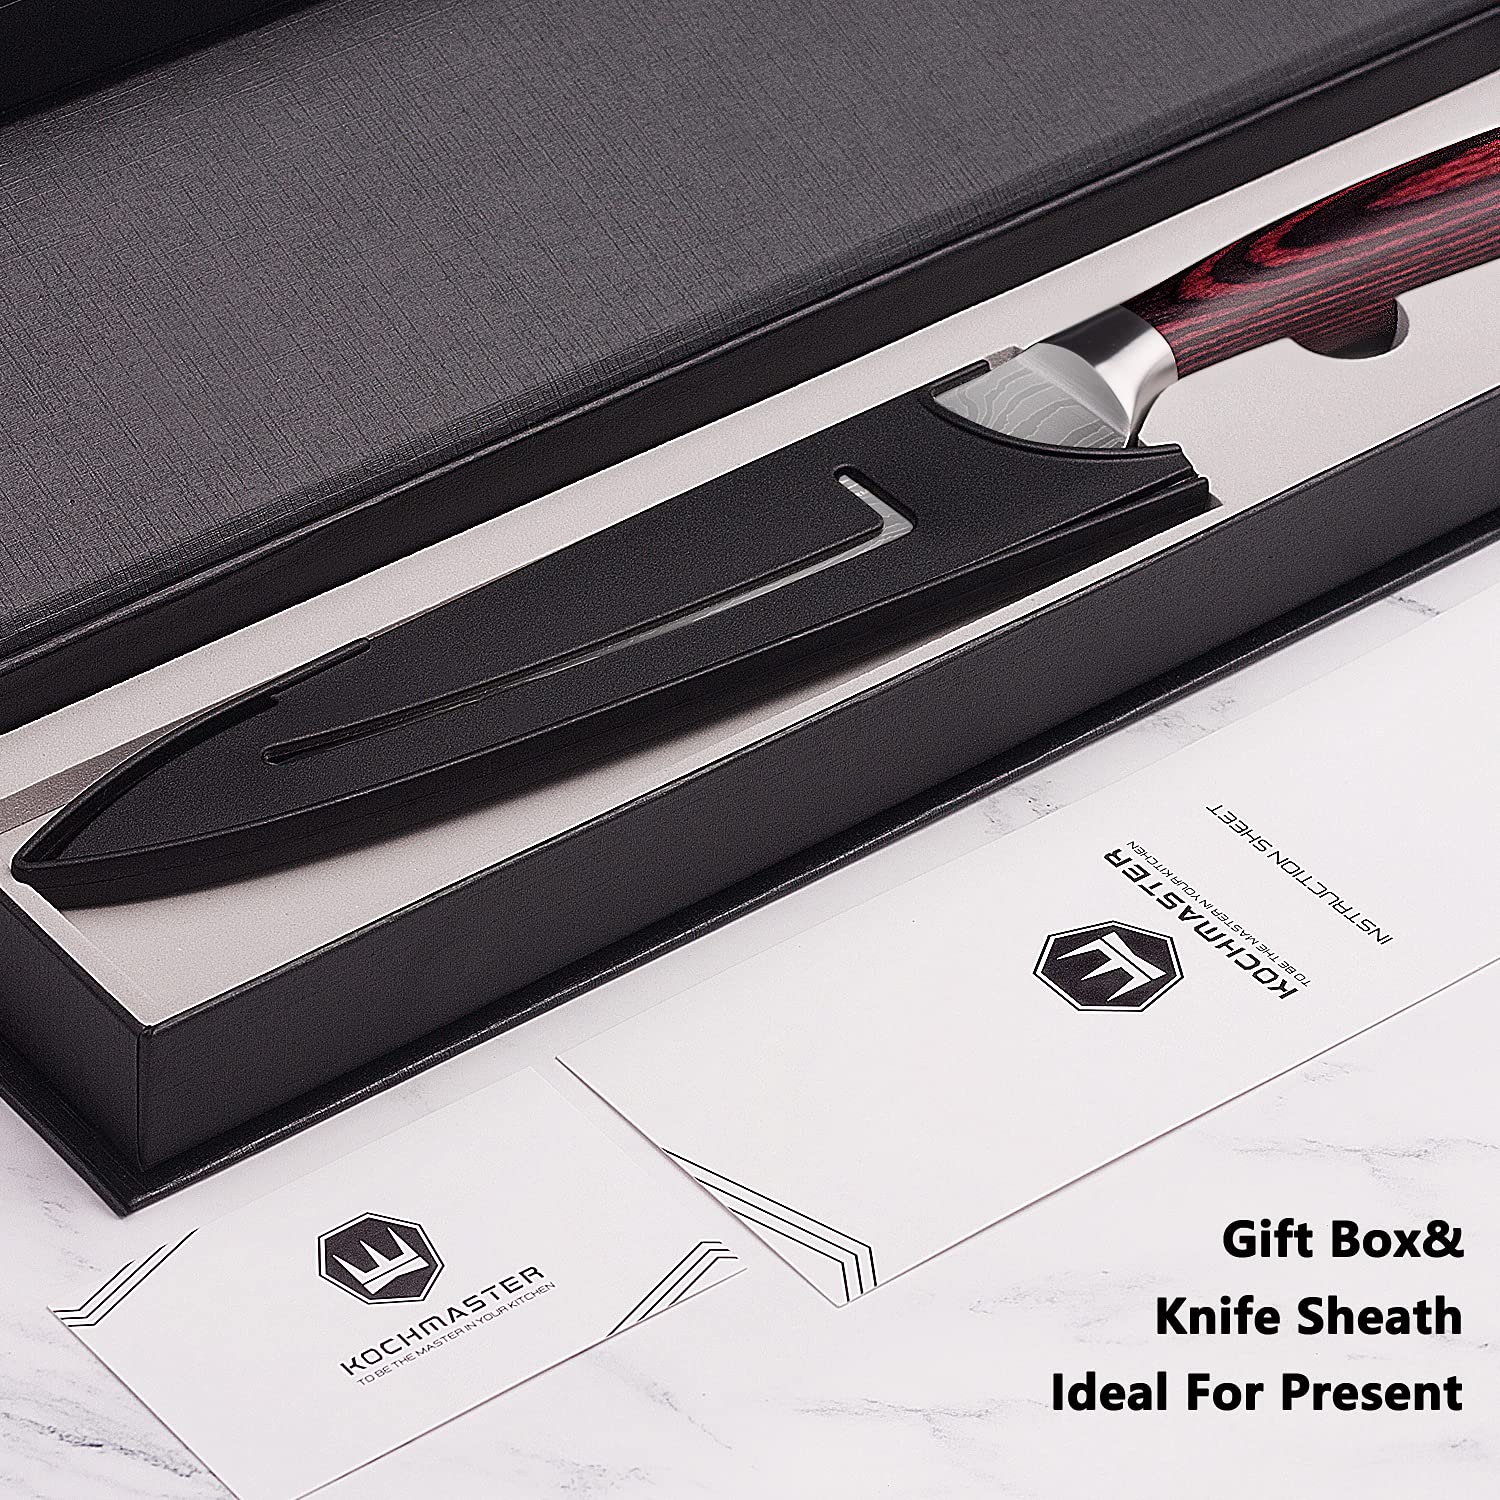 KOCHMASTER Chef Knife Professional 8" ,Kitchen Knife Ultra Sharp with Sheath,Made of High Carbon German Steel and Pakka Wood Handle with Gift Box Packing,The Ideal Choice for Kitchen & Restaurant